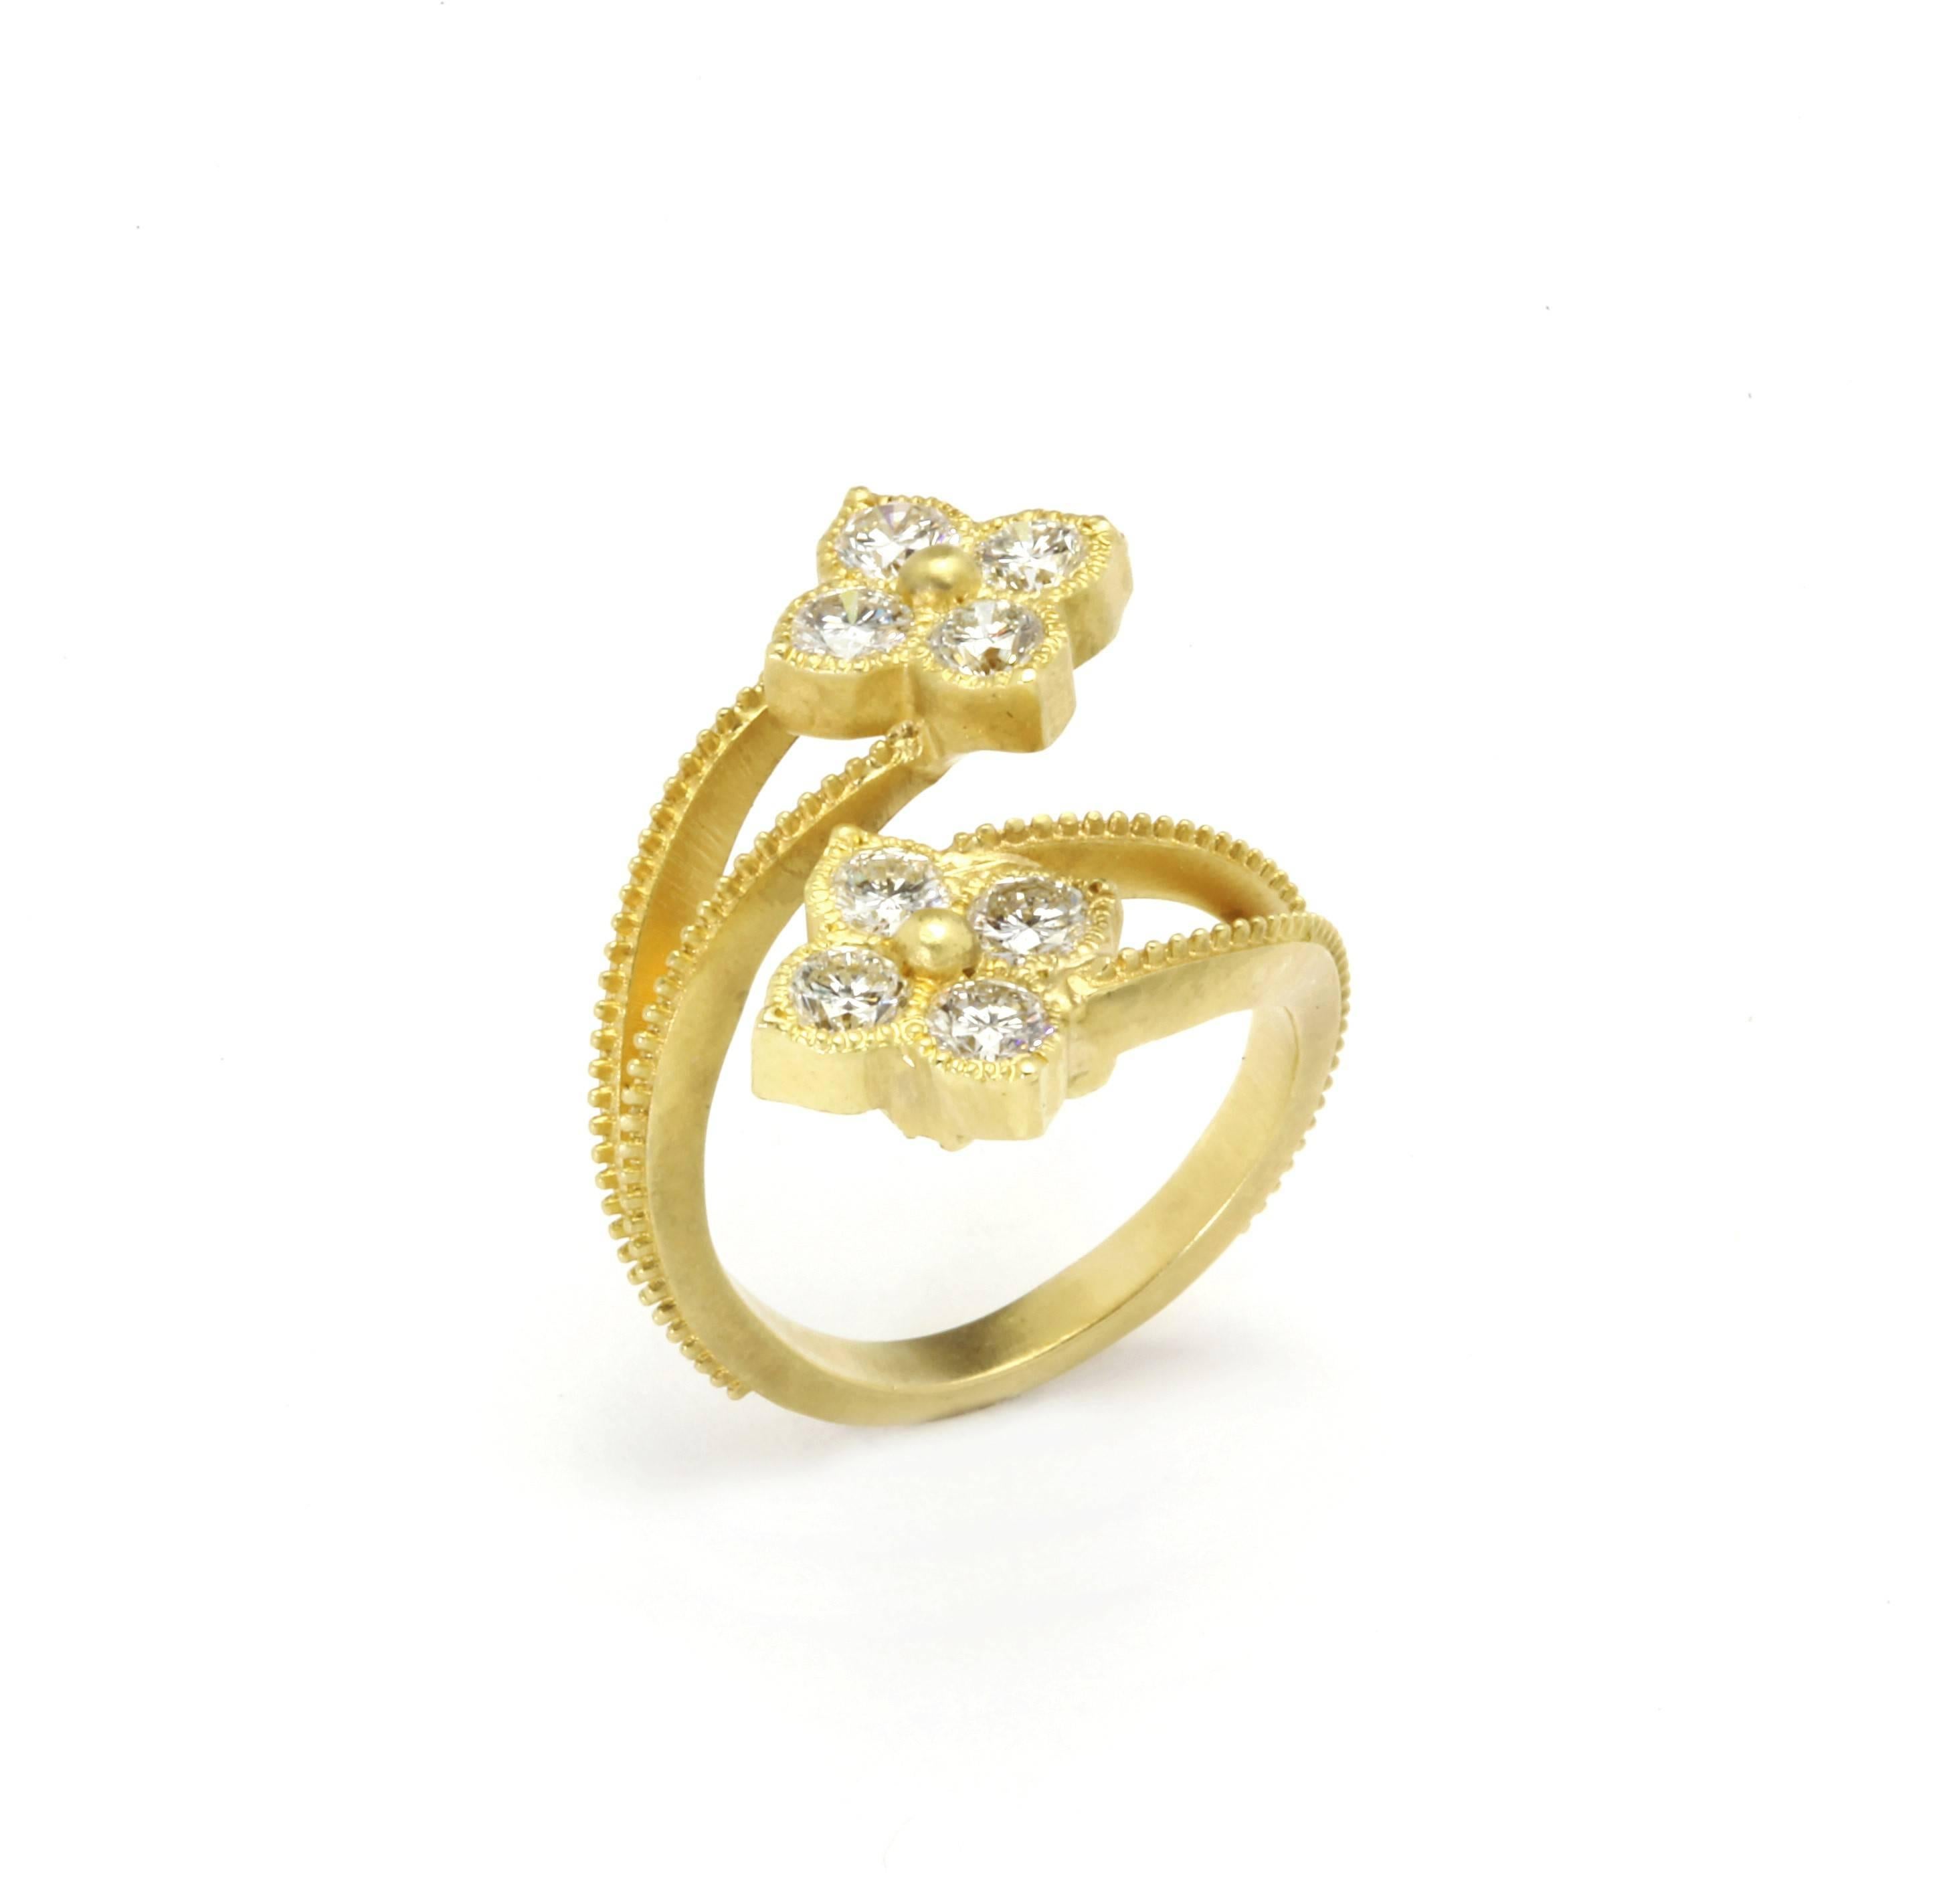 18K Yellow Gold and Diamond Double Cluster Bypass Ring by  Stambolian

Ring features two clusters, each with four diamonds. This bypass ring crosses over one another to bring the true and original beauty of simplicity.

1.77 carat G color, VS